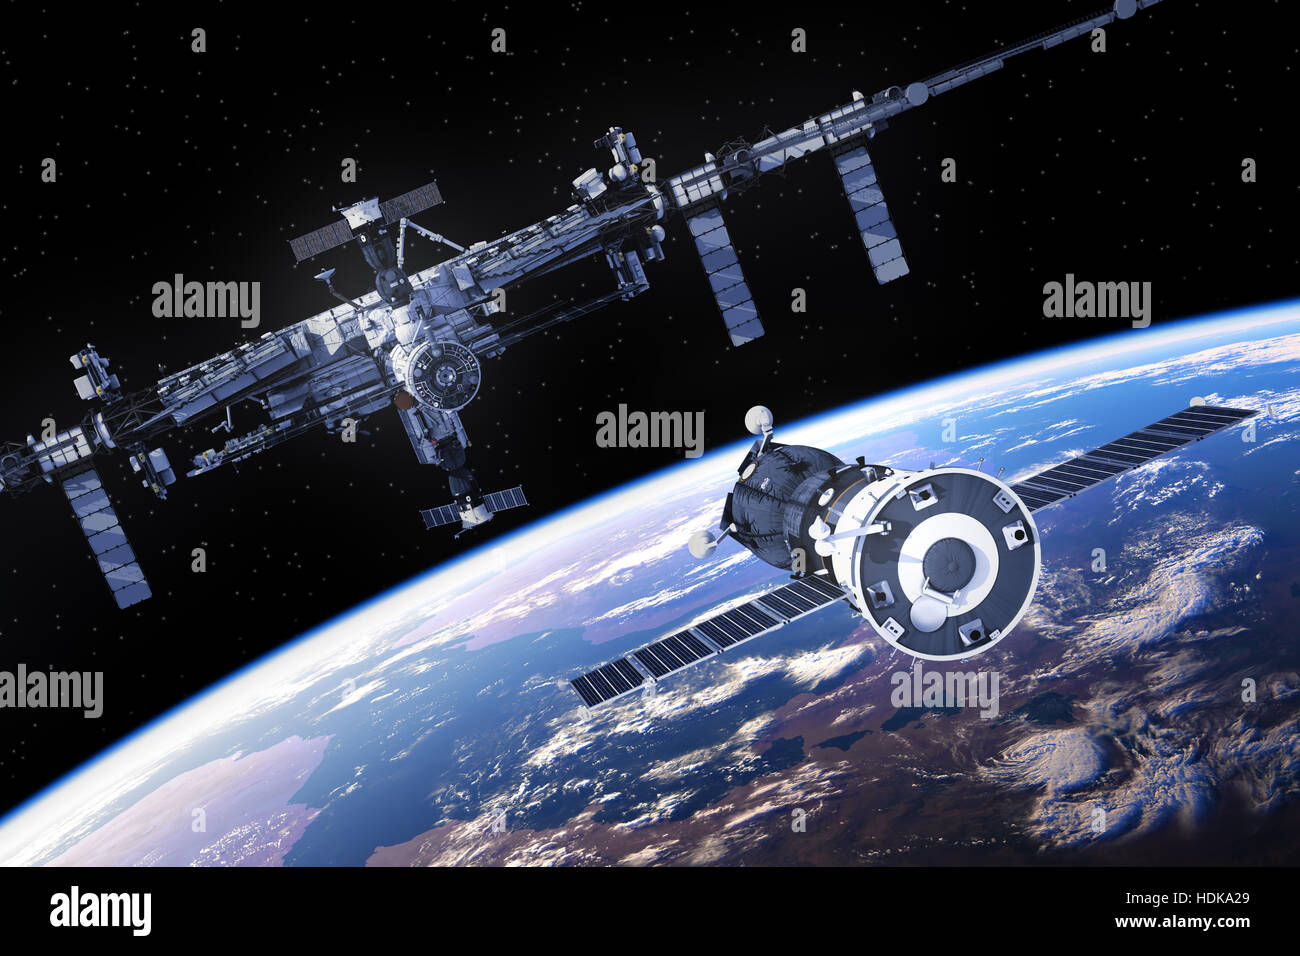 Spacecraft Is Preparing To Dock With International Space Station. 3D Illustration. Stock Photo